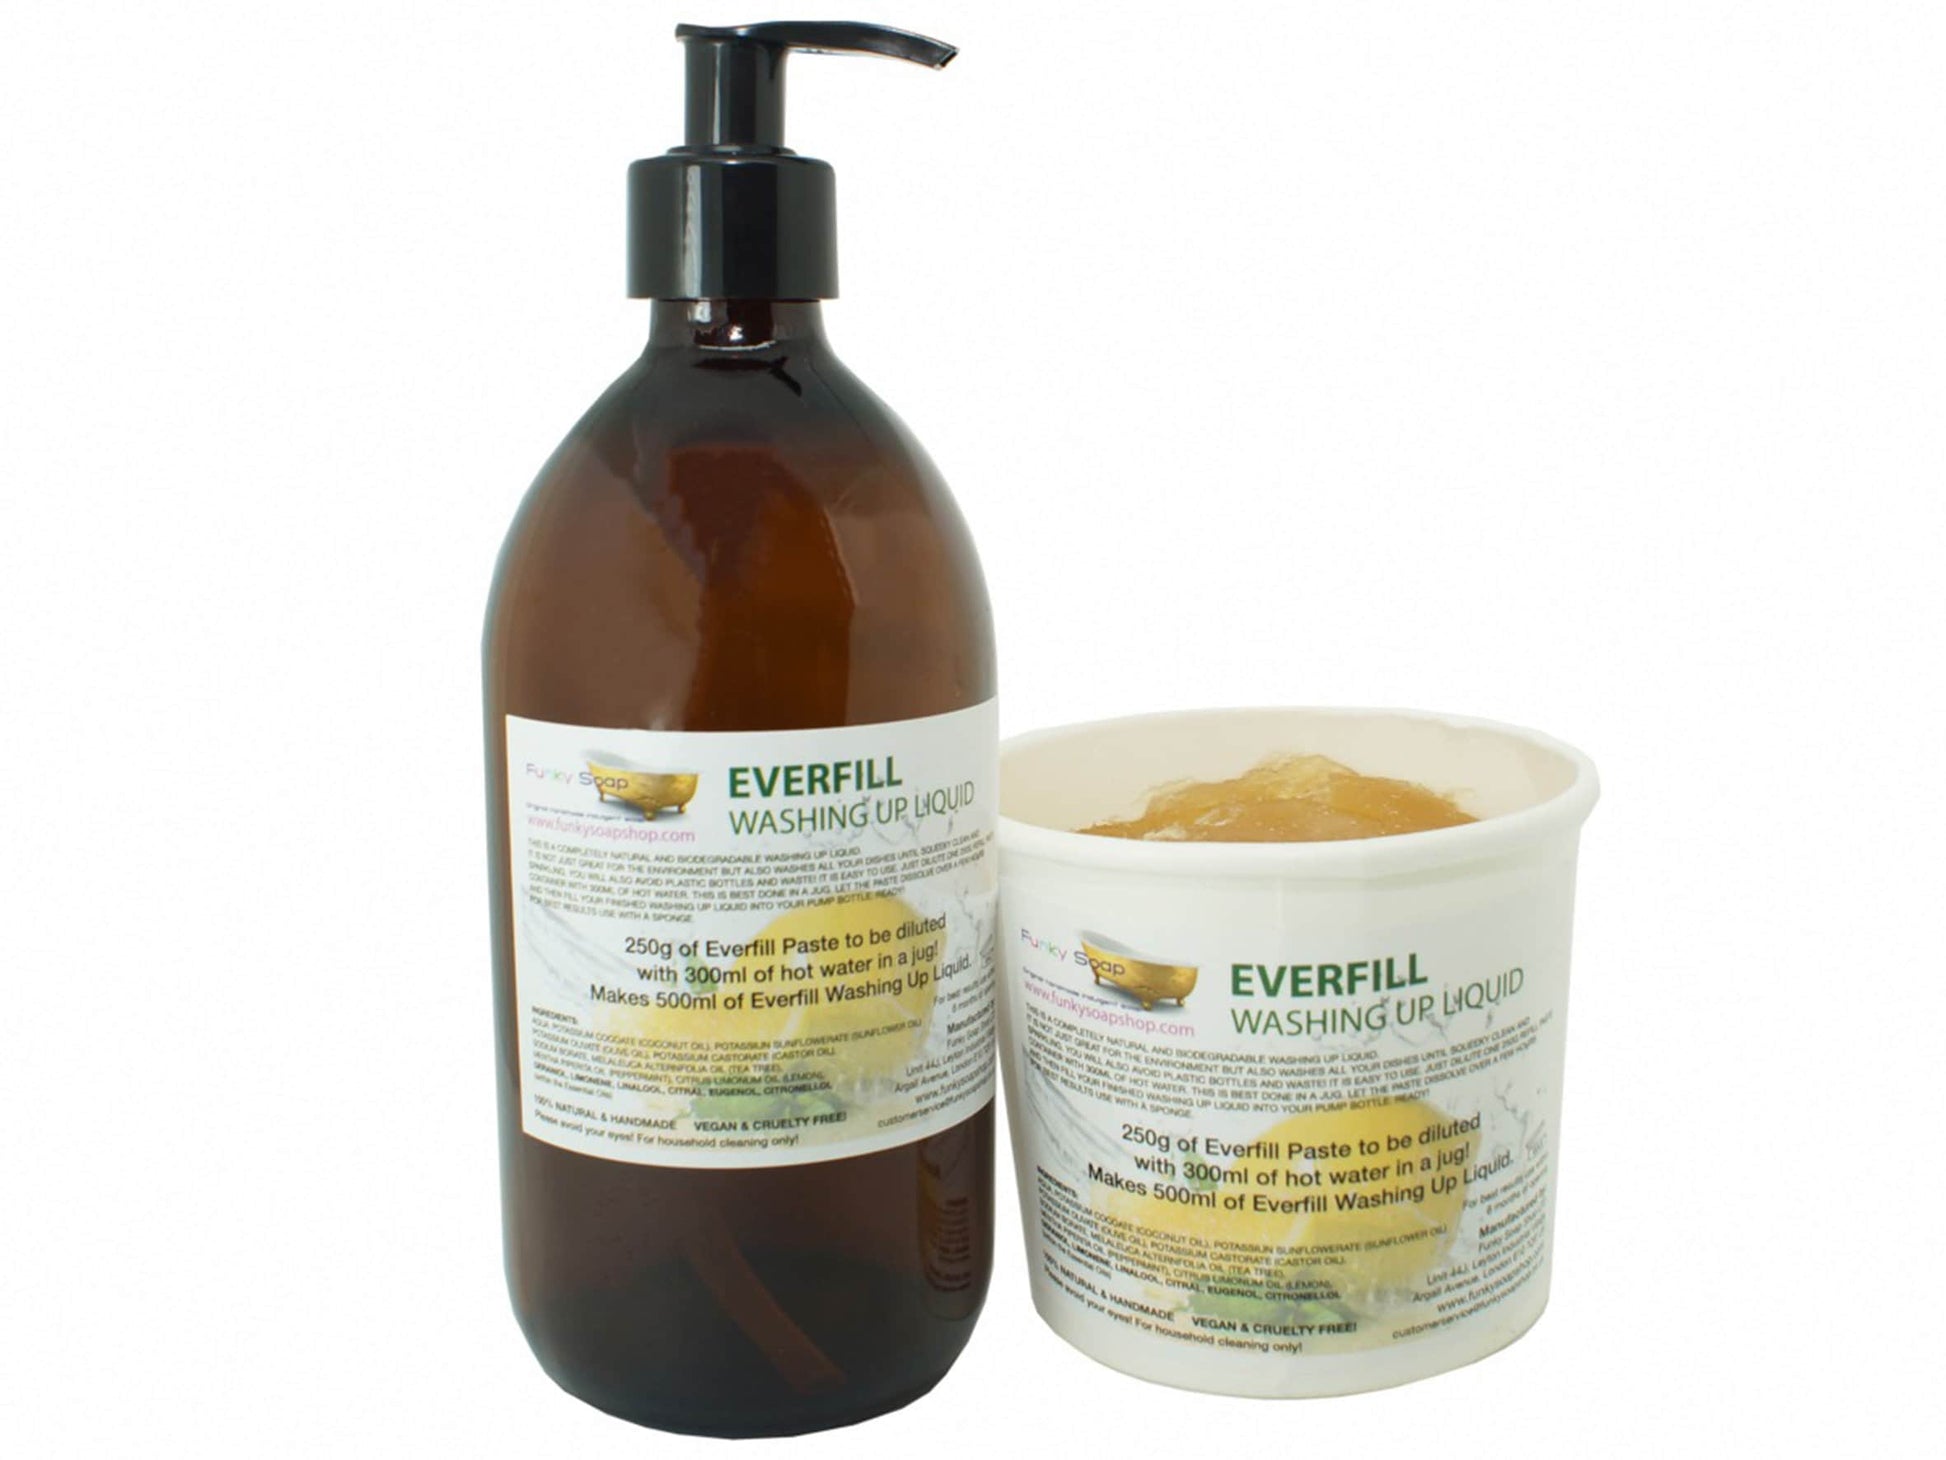 EVERFILL Washing Up Liquid, Refill 250g and Empty Glass Bottle 500ml - Funky Soap Shop